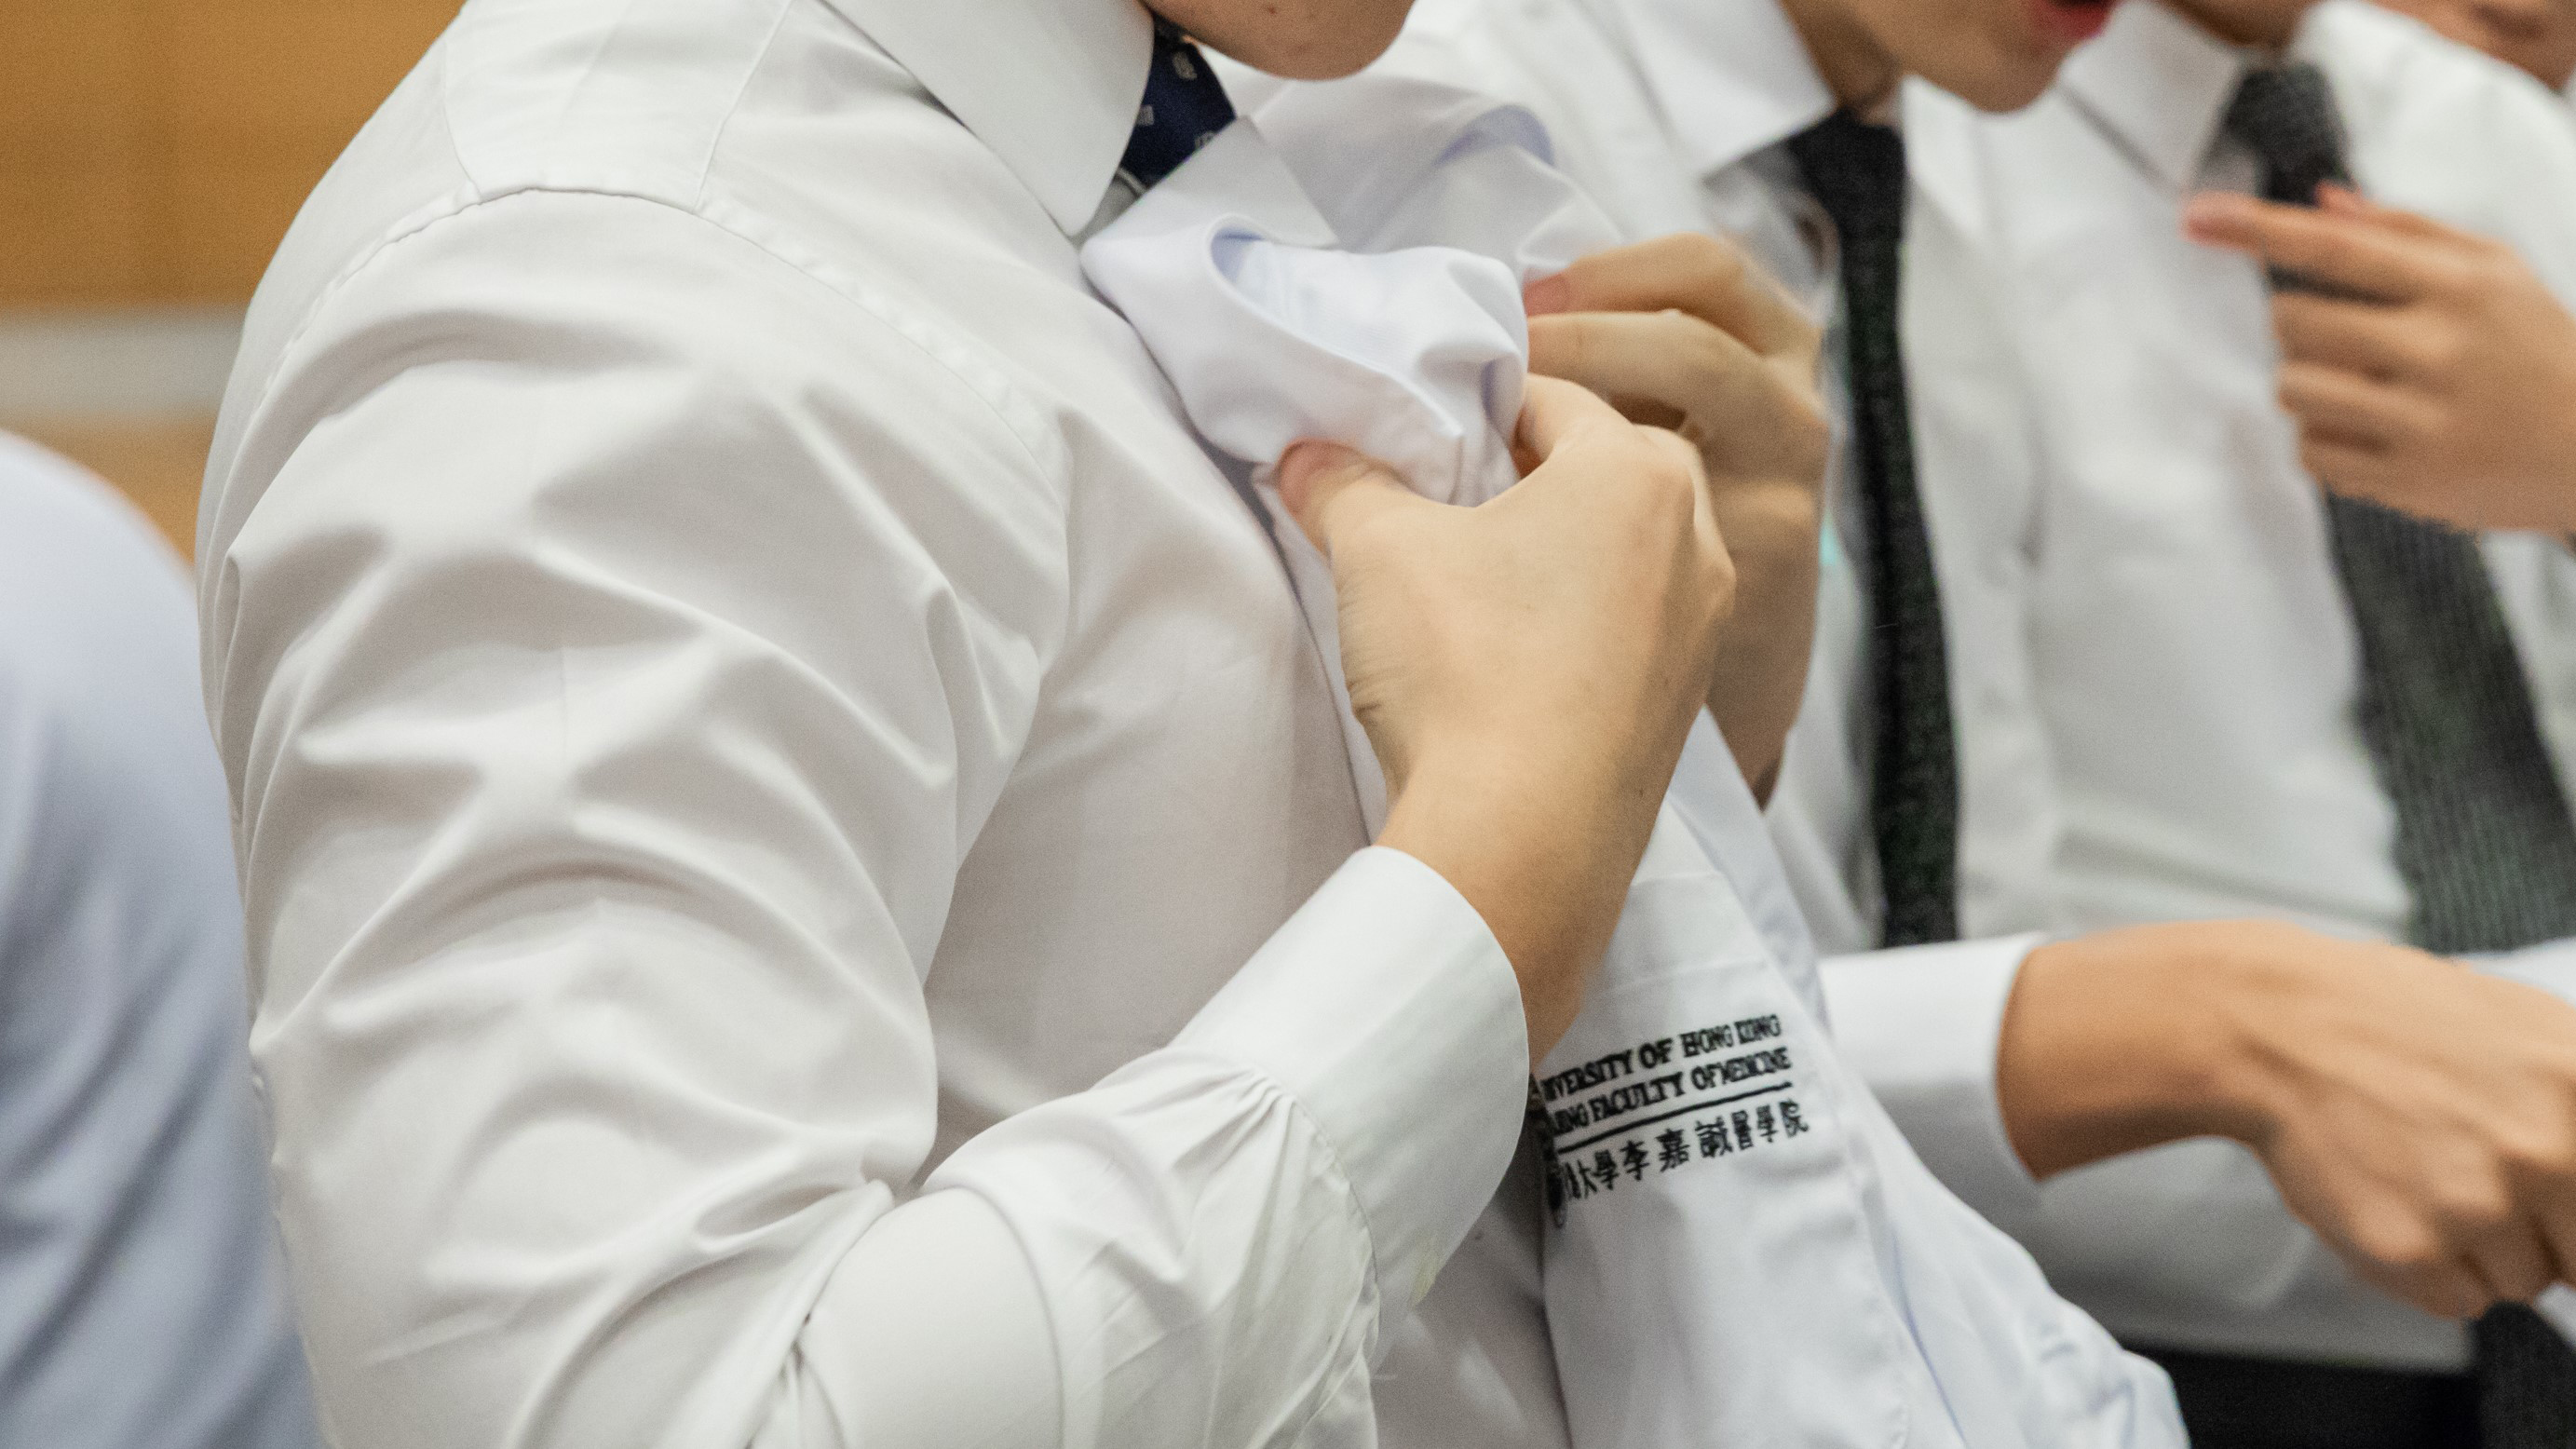 A medical student holding his white coat.